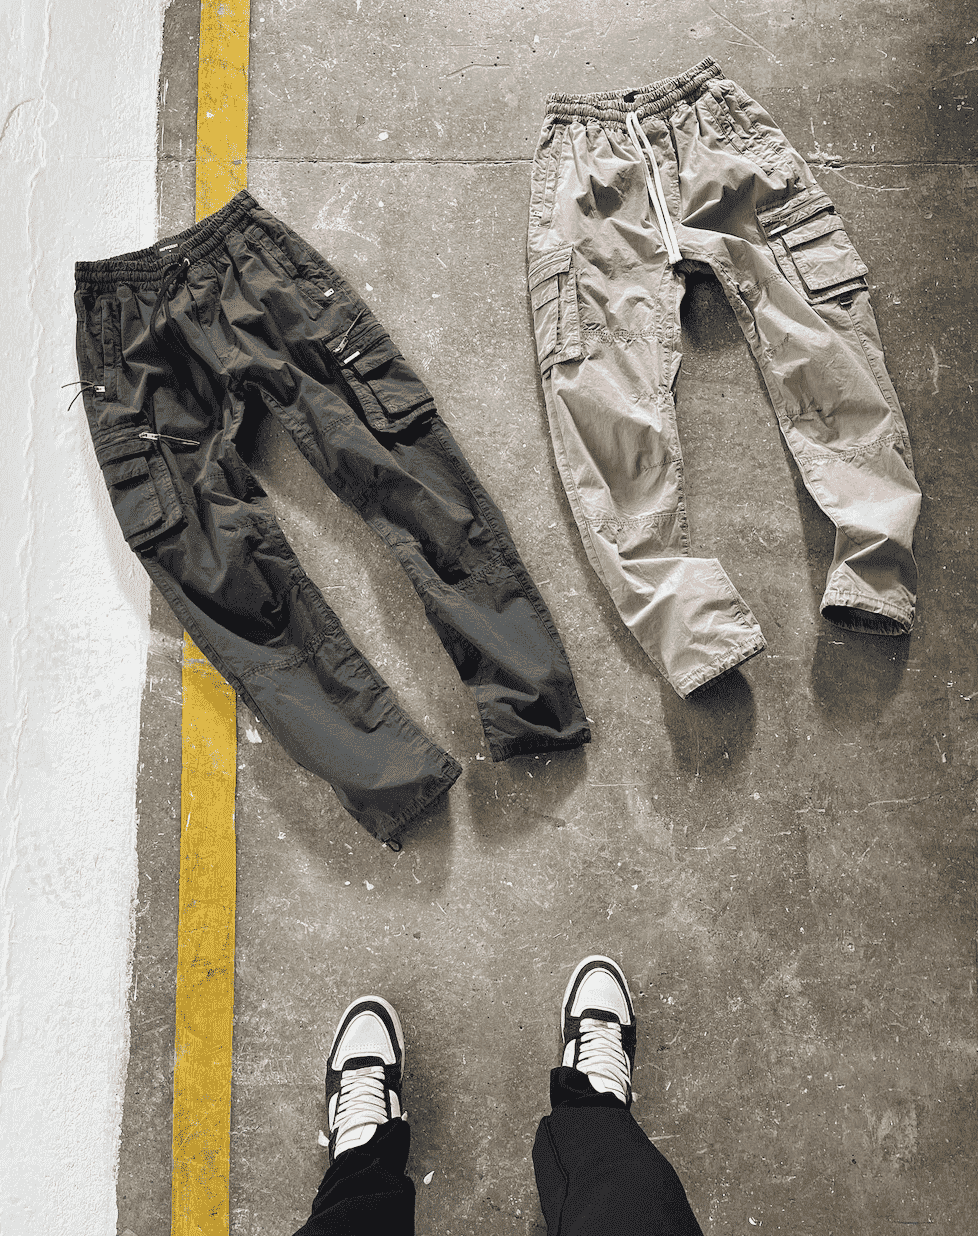 Beige Cargo Pants V7  Cargo pants outfit, Jogger pants outfit, Cargo pants  outfit men